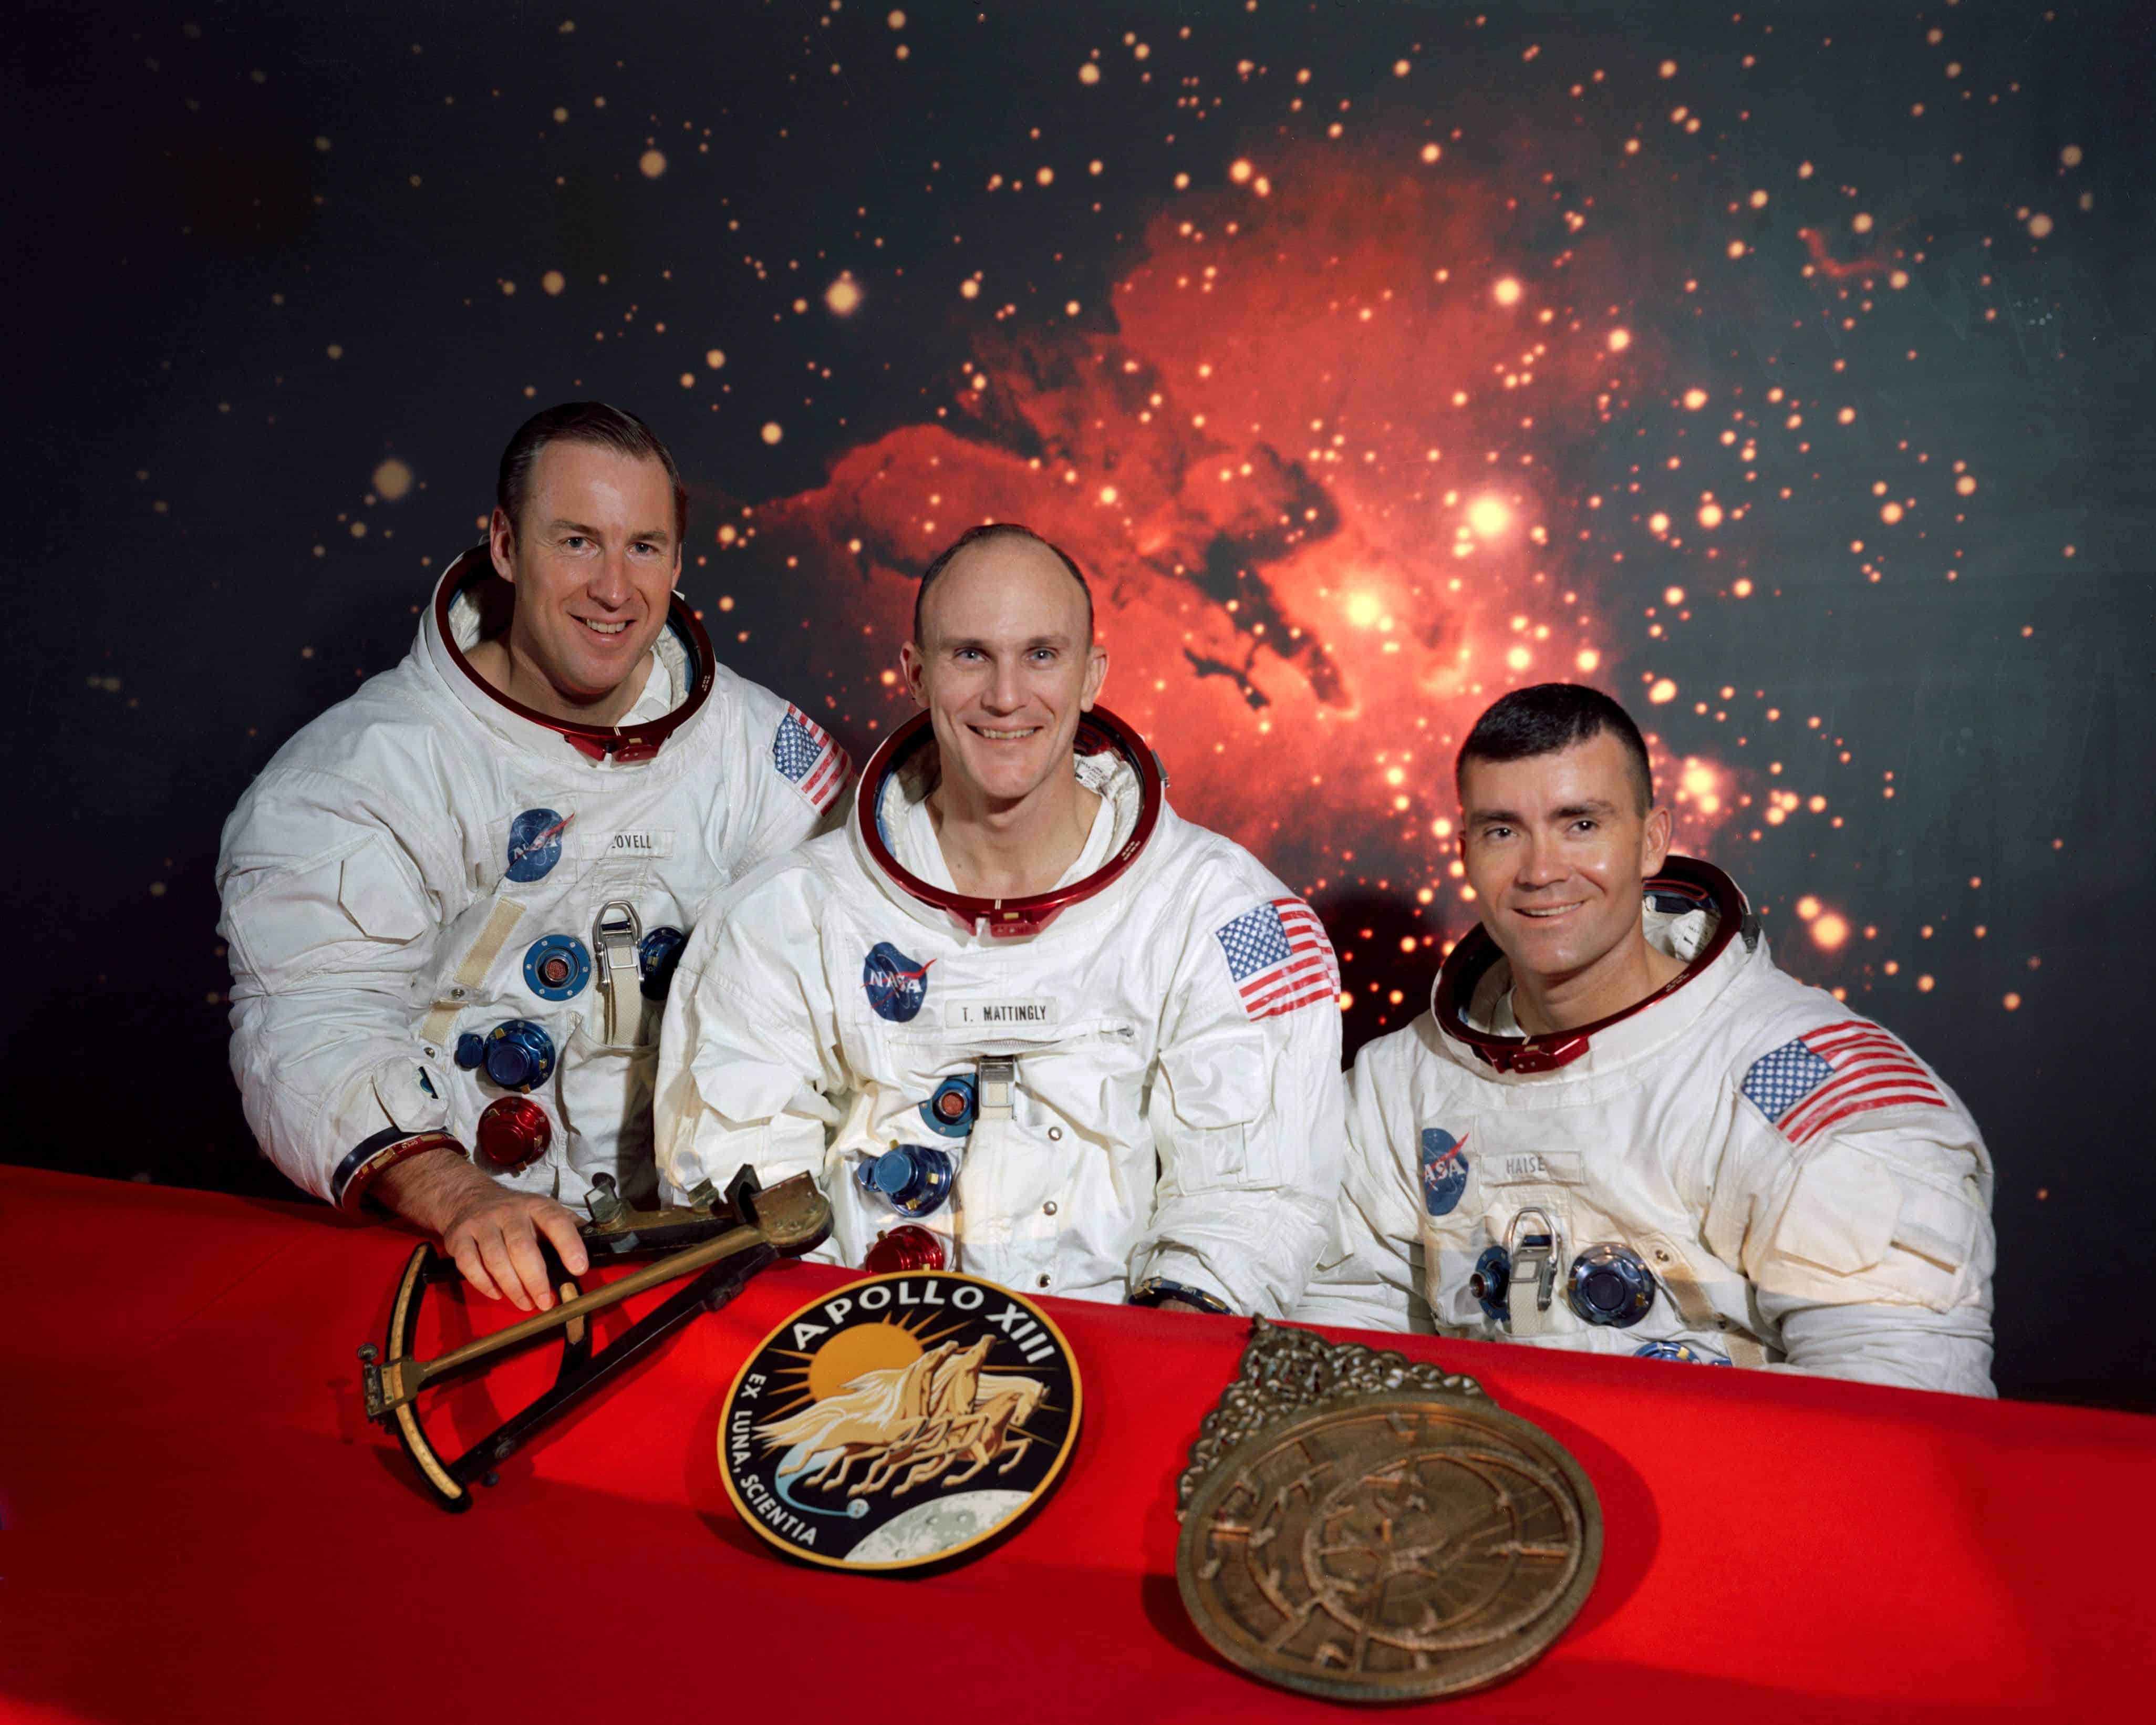 The members of the prime crew of the Apollo 13 lunar landing mission are astronauts James A. Lovell Jr. (from left), commander; Thomas K. Mattingly II (replaced by Jack Swigert for the actual mission), command module pilot; and Fred W. Haise Jr., lunar module pilot. (Photo courtesy of NASA)